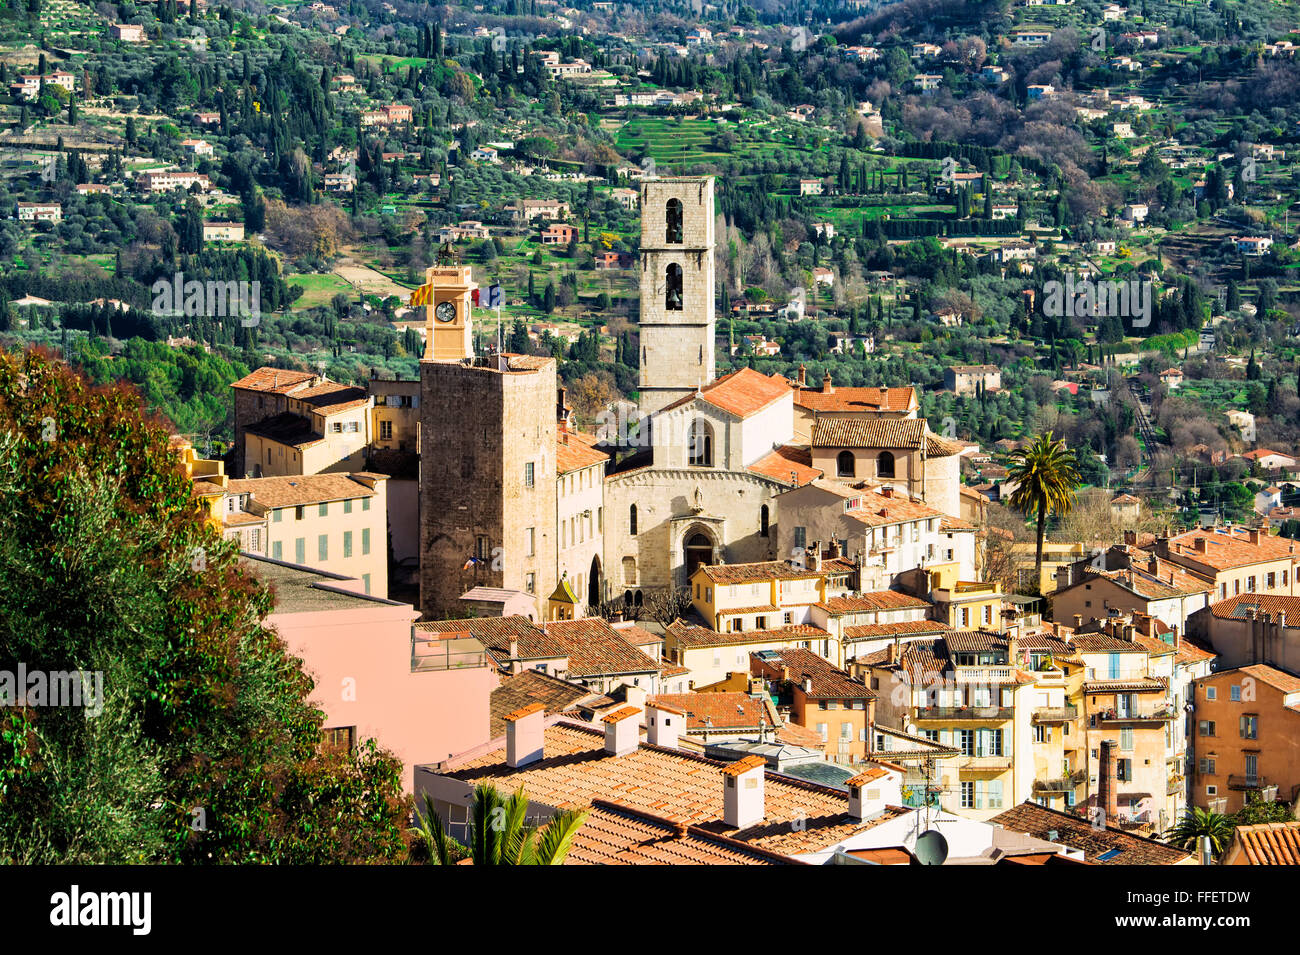 old town of Grasse and Cathedral Notre-Dame du Puy, Grasse, Alpes-Maritimes Department, Cote d'Azur, France Stock Photo